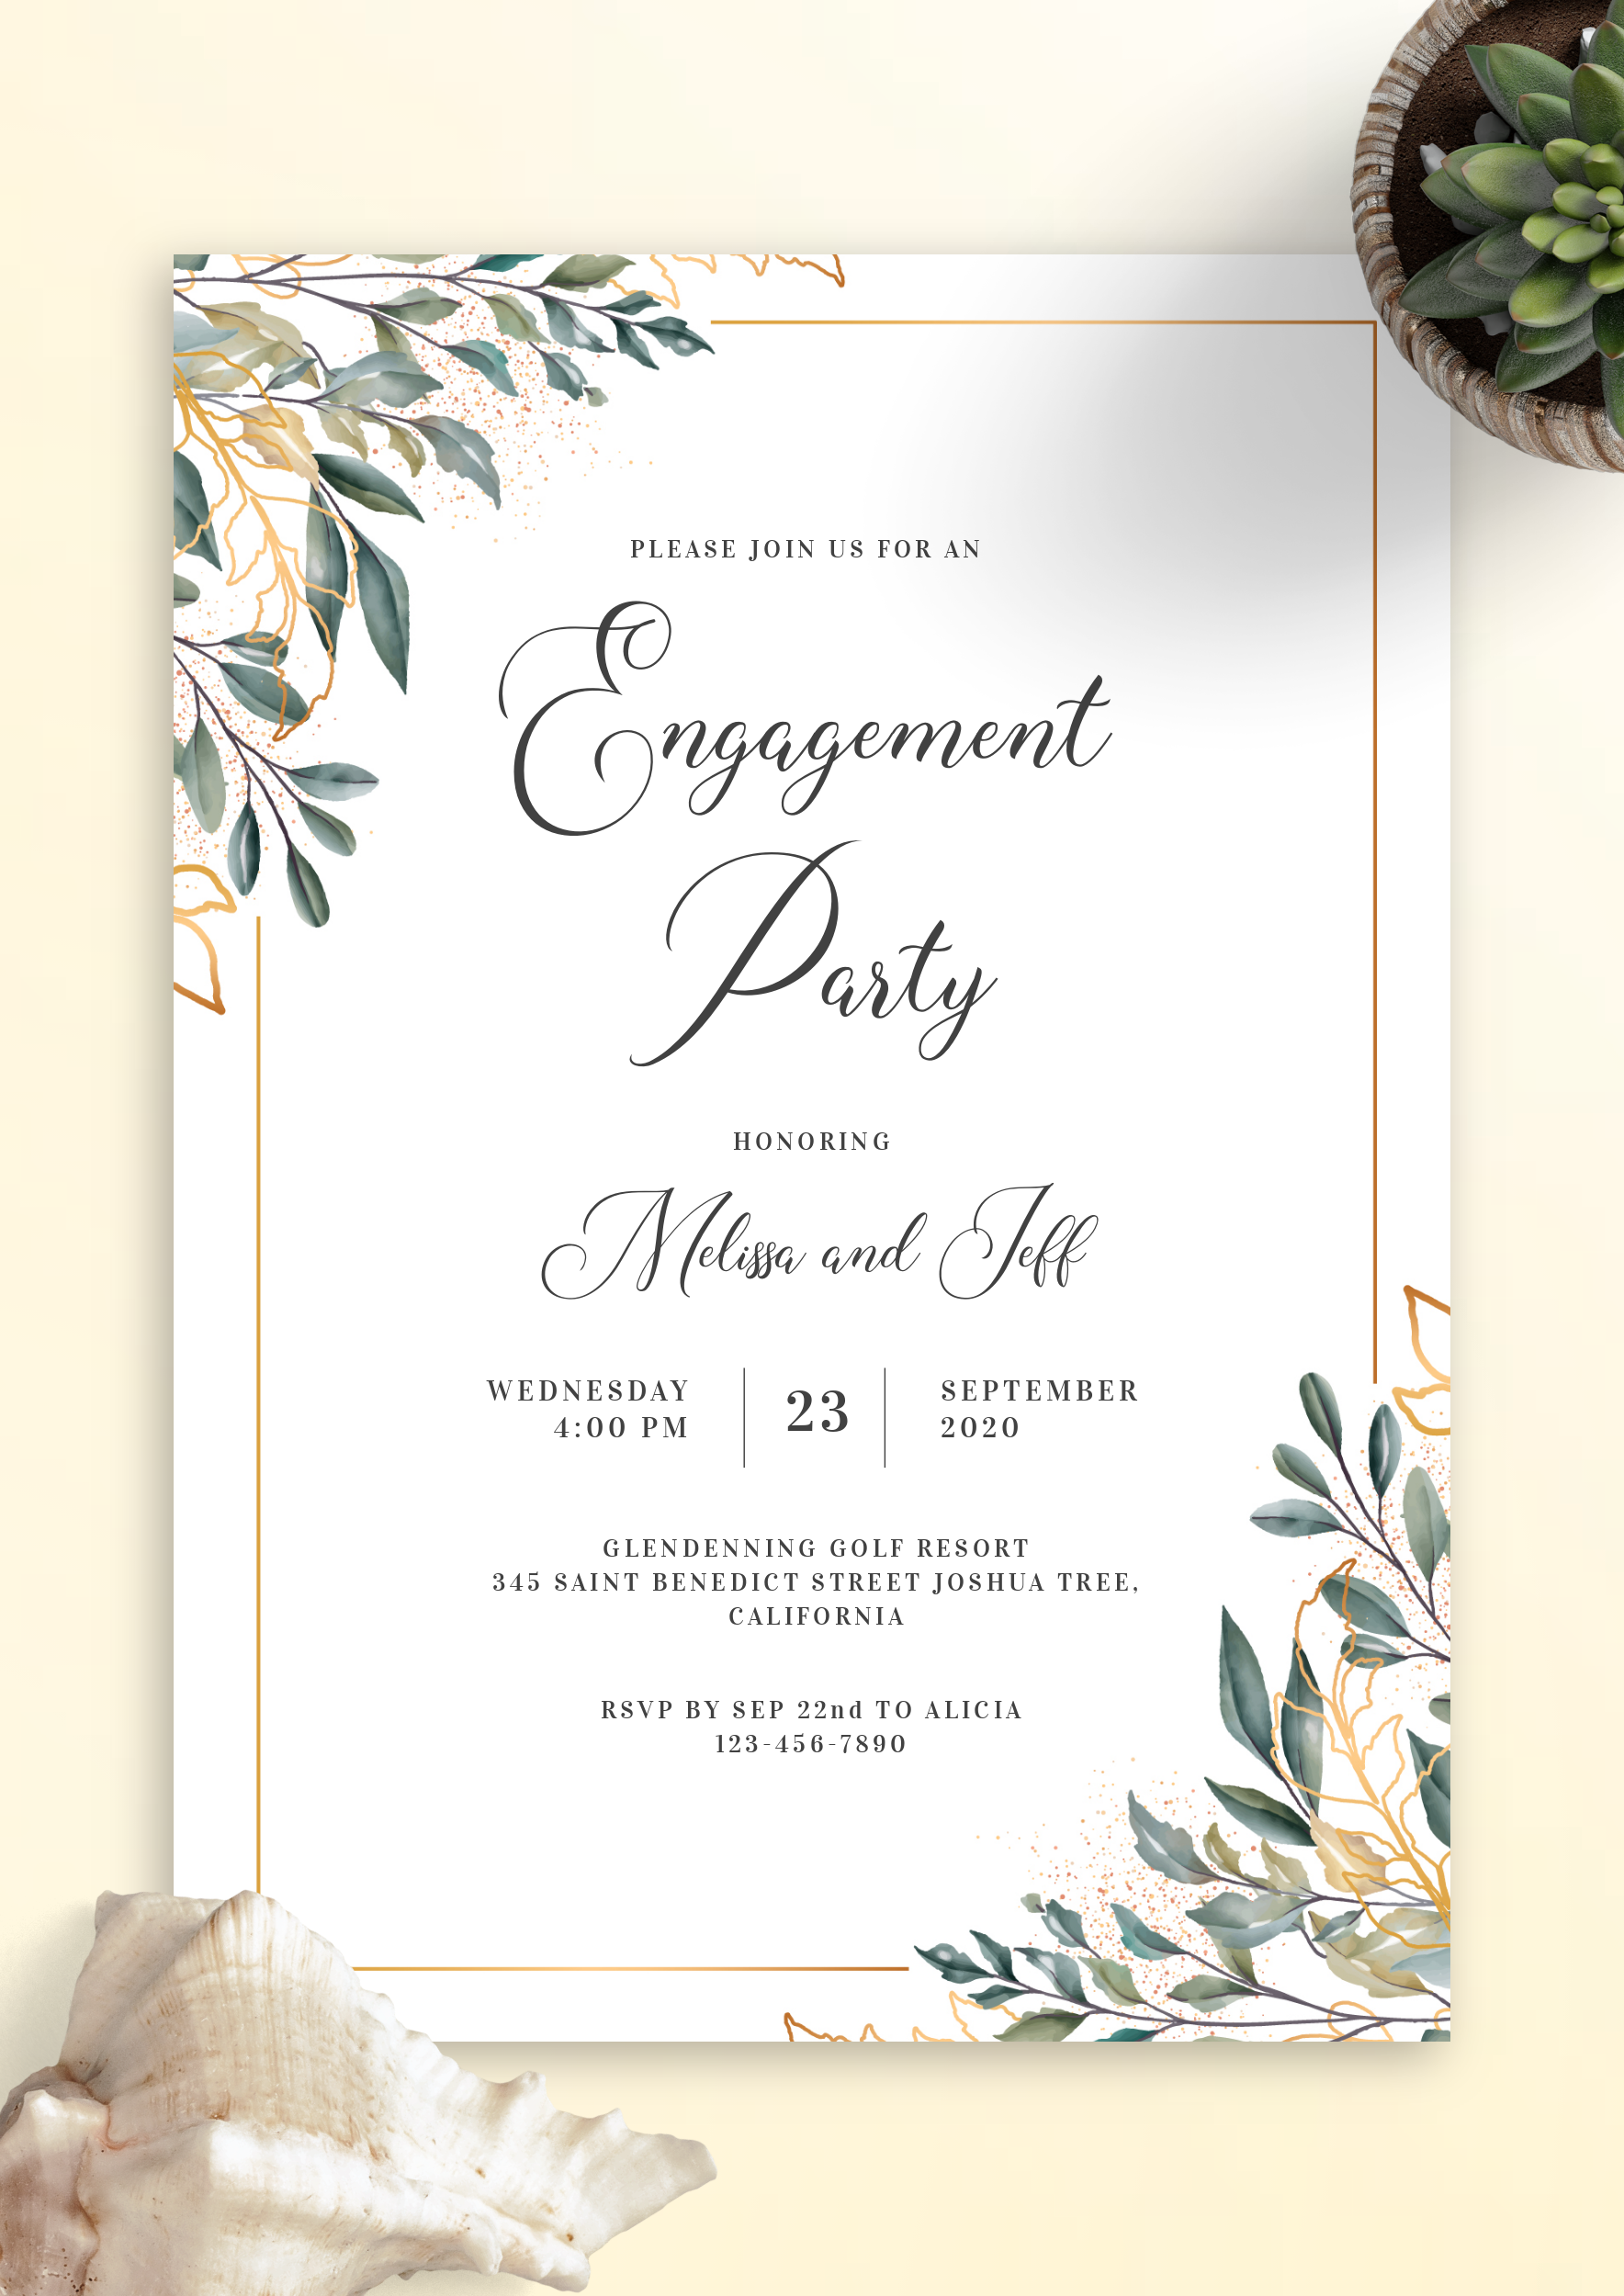 Top 8 Latest Viral and Trendy Engagement Invitation Message Ideas - myMandap